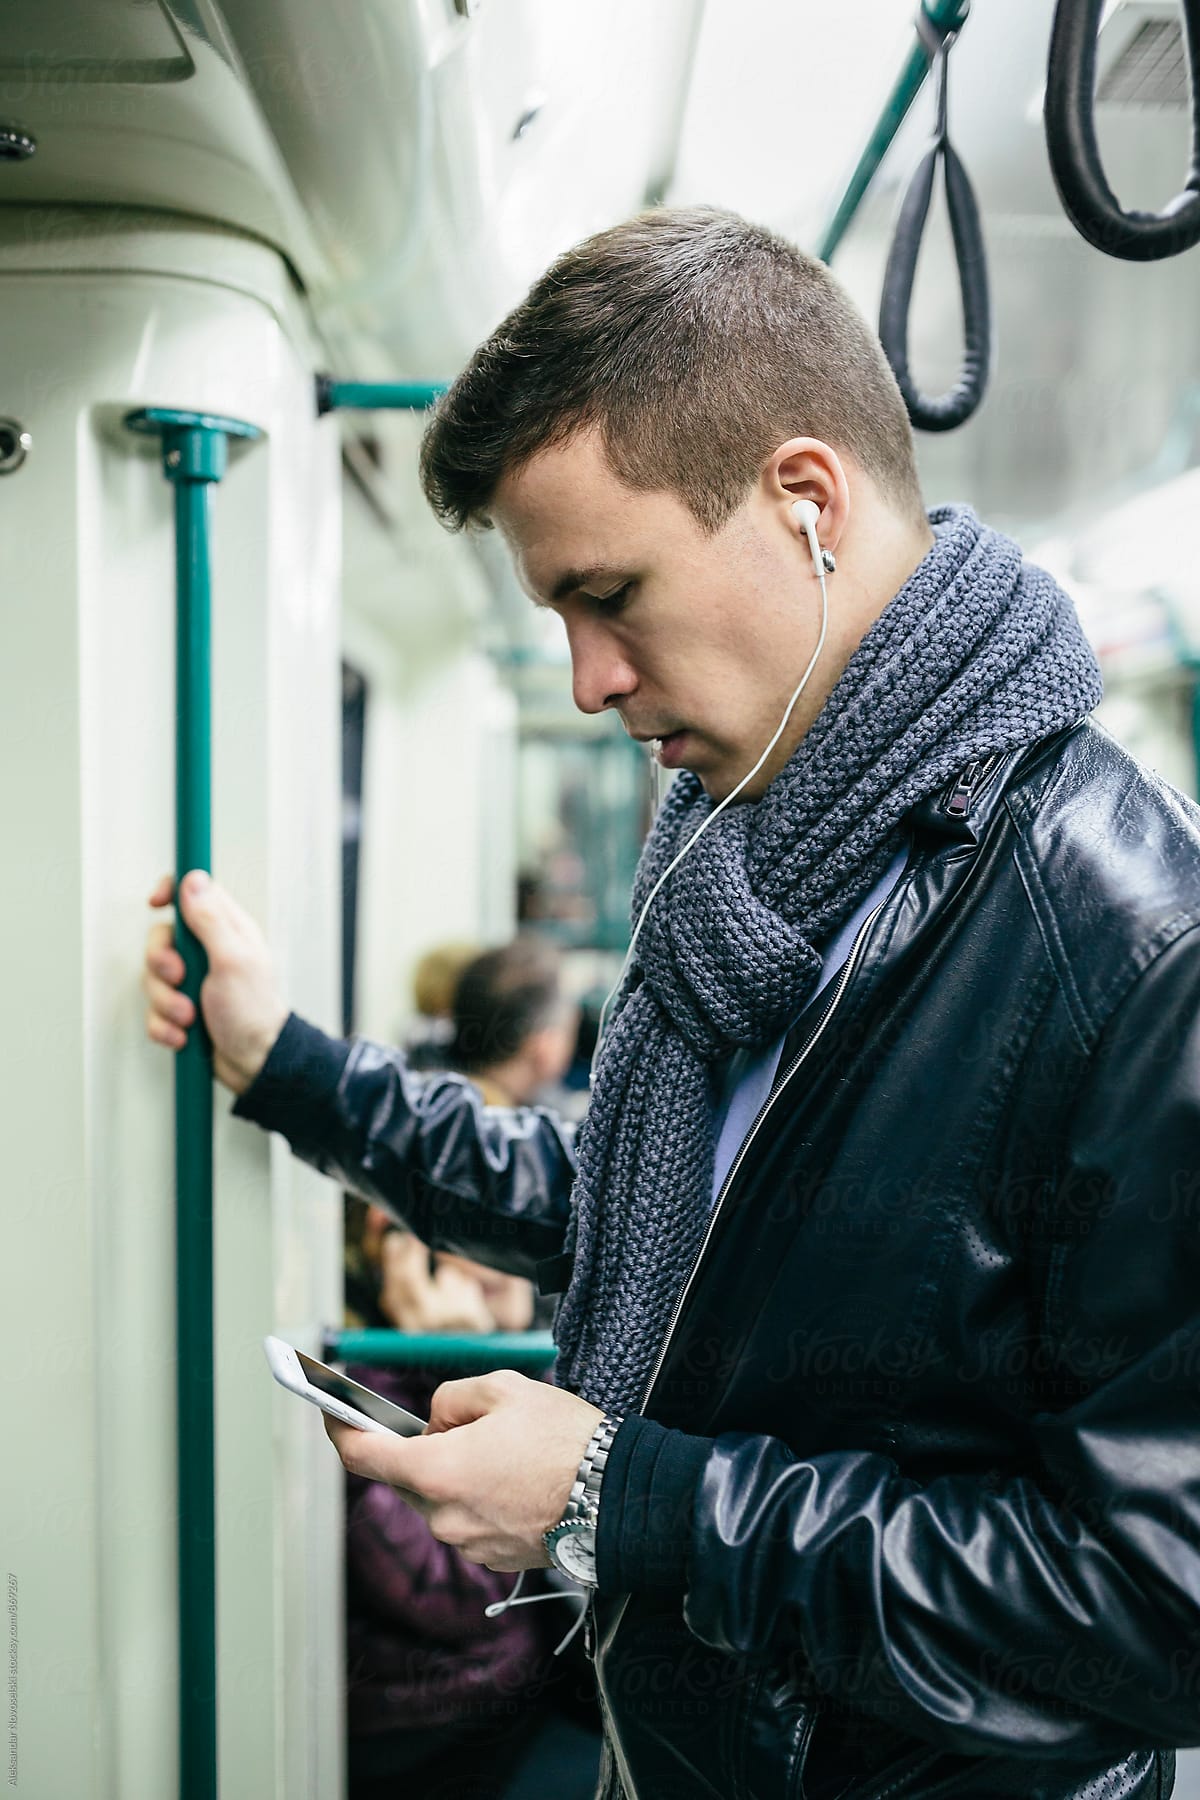 Young man using his smartphone with his headphones plugged in, in the subway